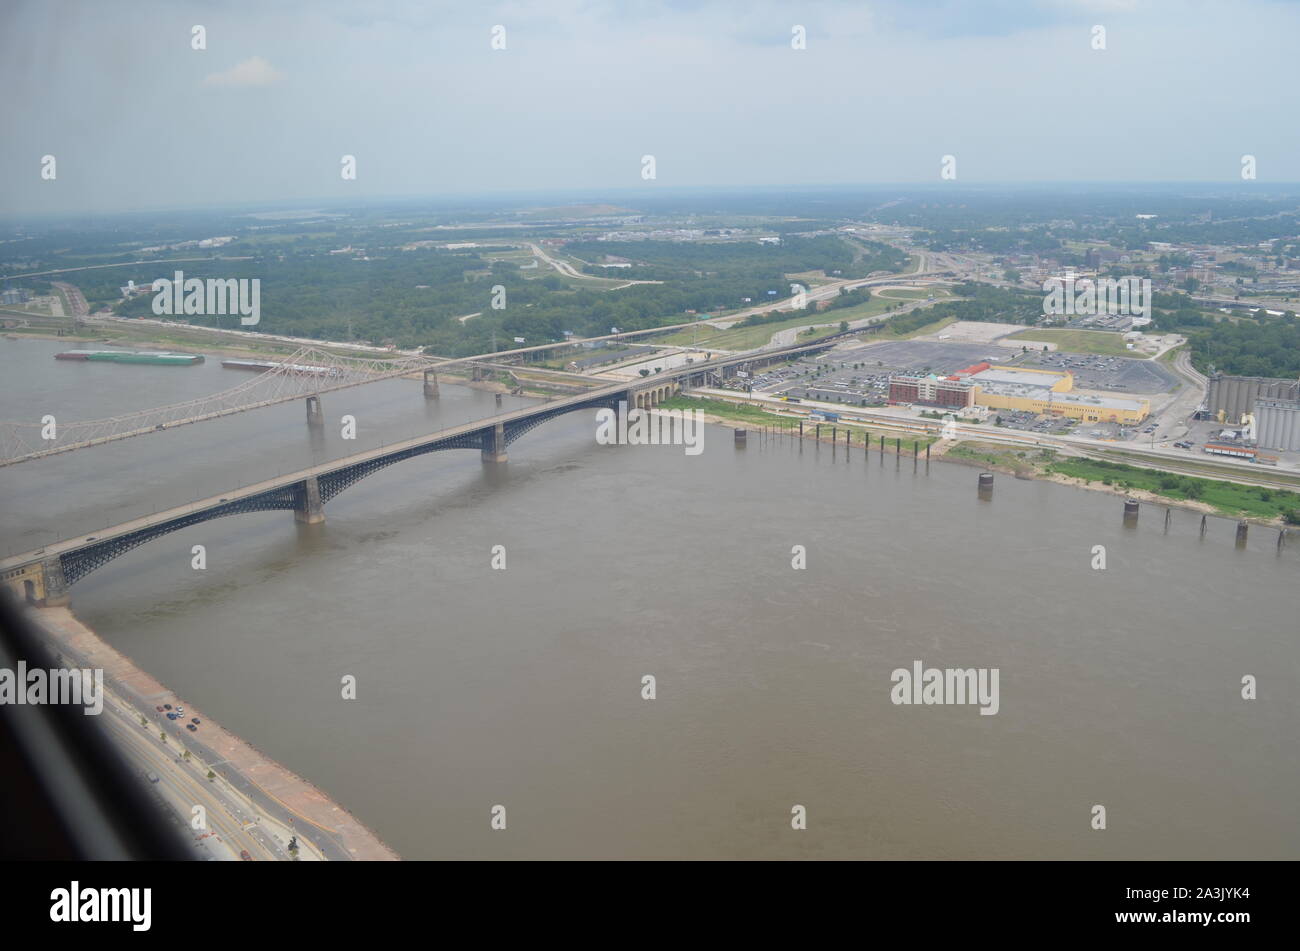 Summer in Missouri: Overlooking Mississippi River, Eads Bridge and Martin Luther King Bridge in St. Louis Stock Photo